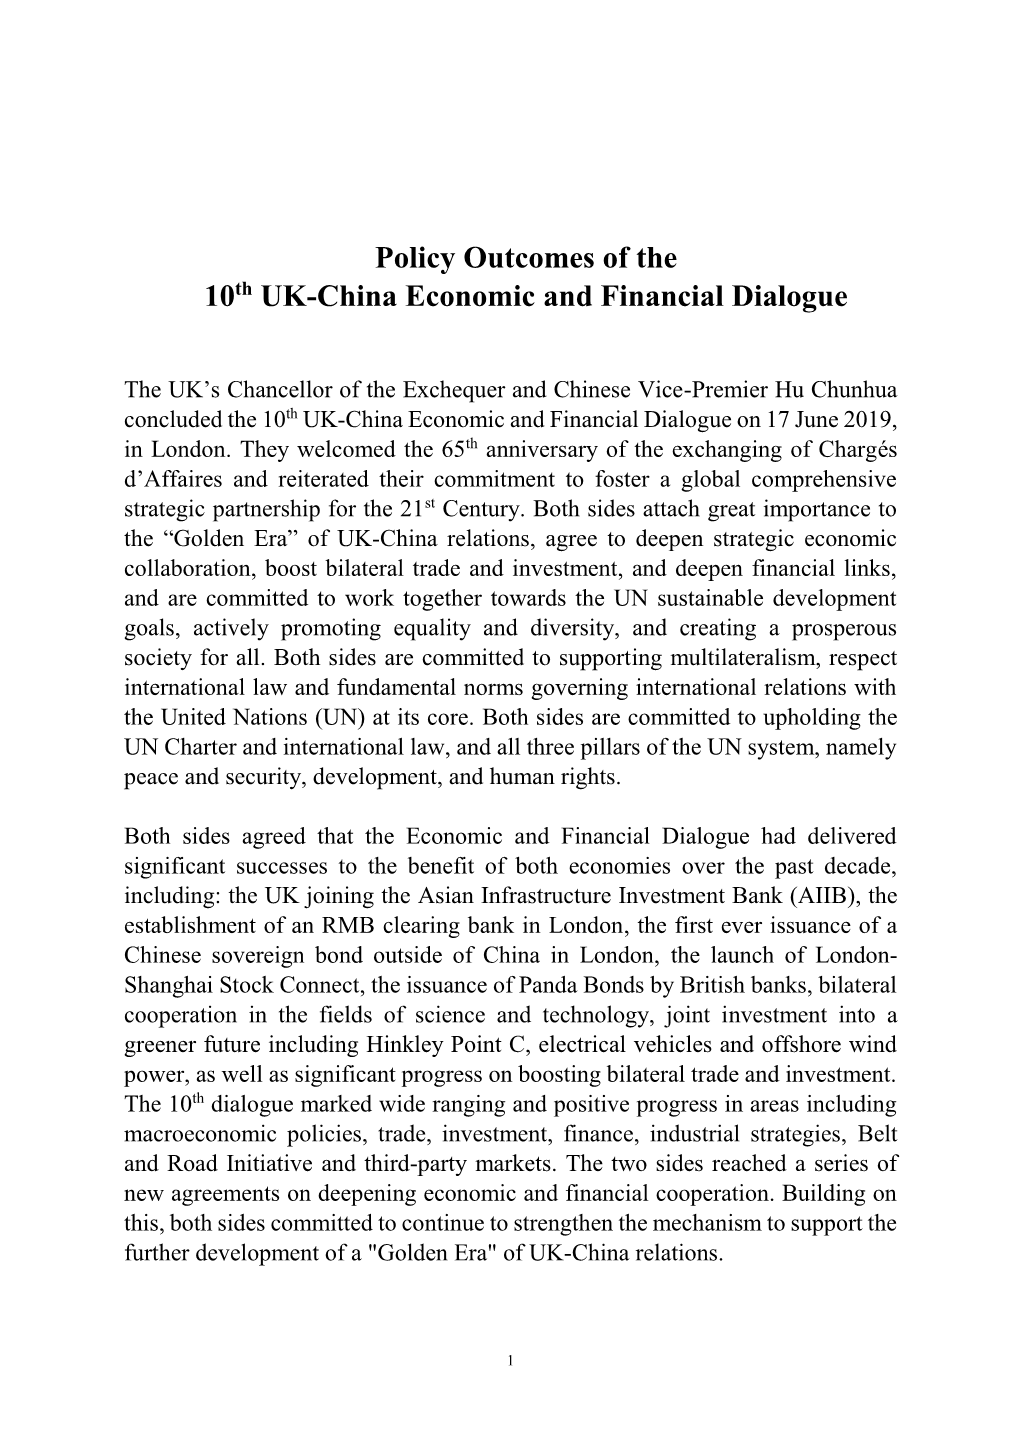 Policy Outcomes of the 10Th UK-China Economic and Financial Dialogue